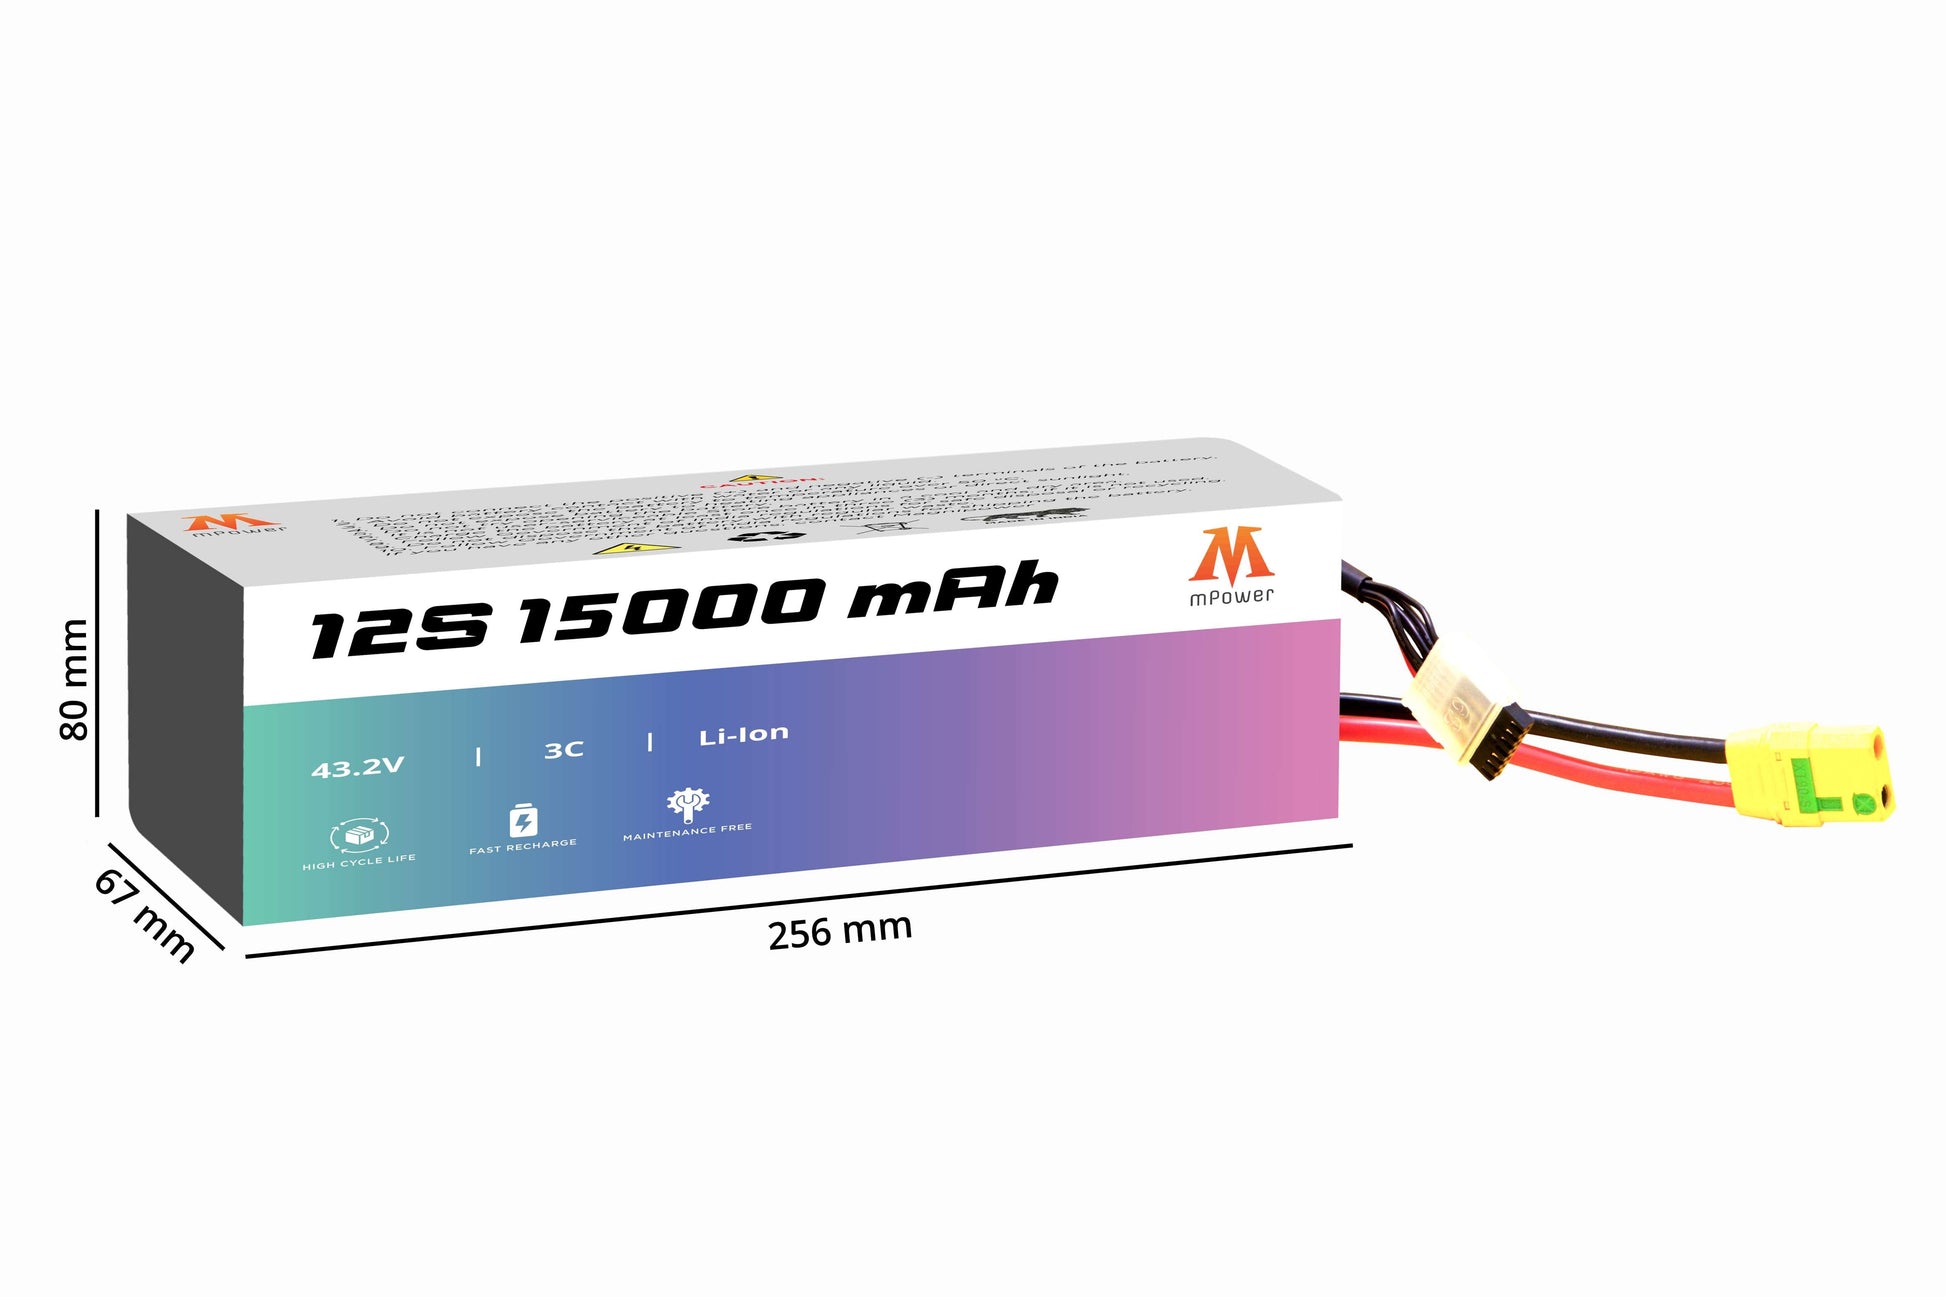 mPower 12S 15000mAh Lithium-Ion Battery for Survey Drones-mpowerlithium